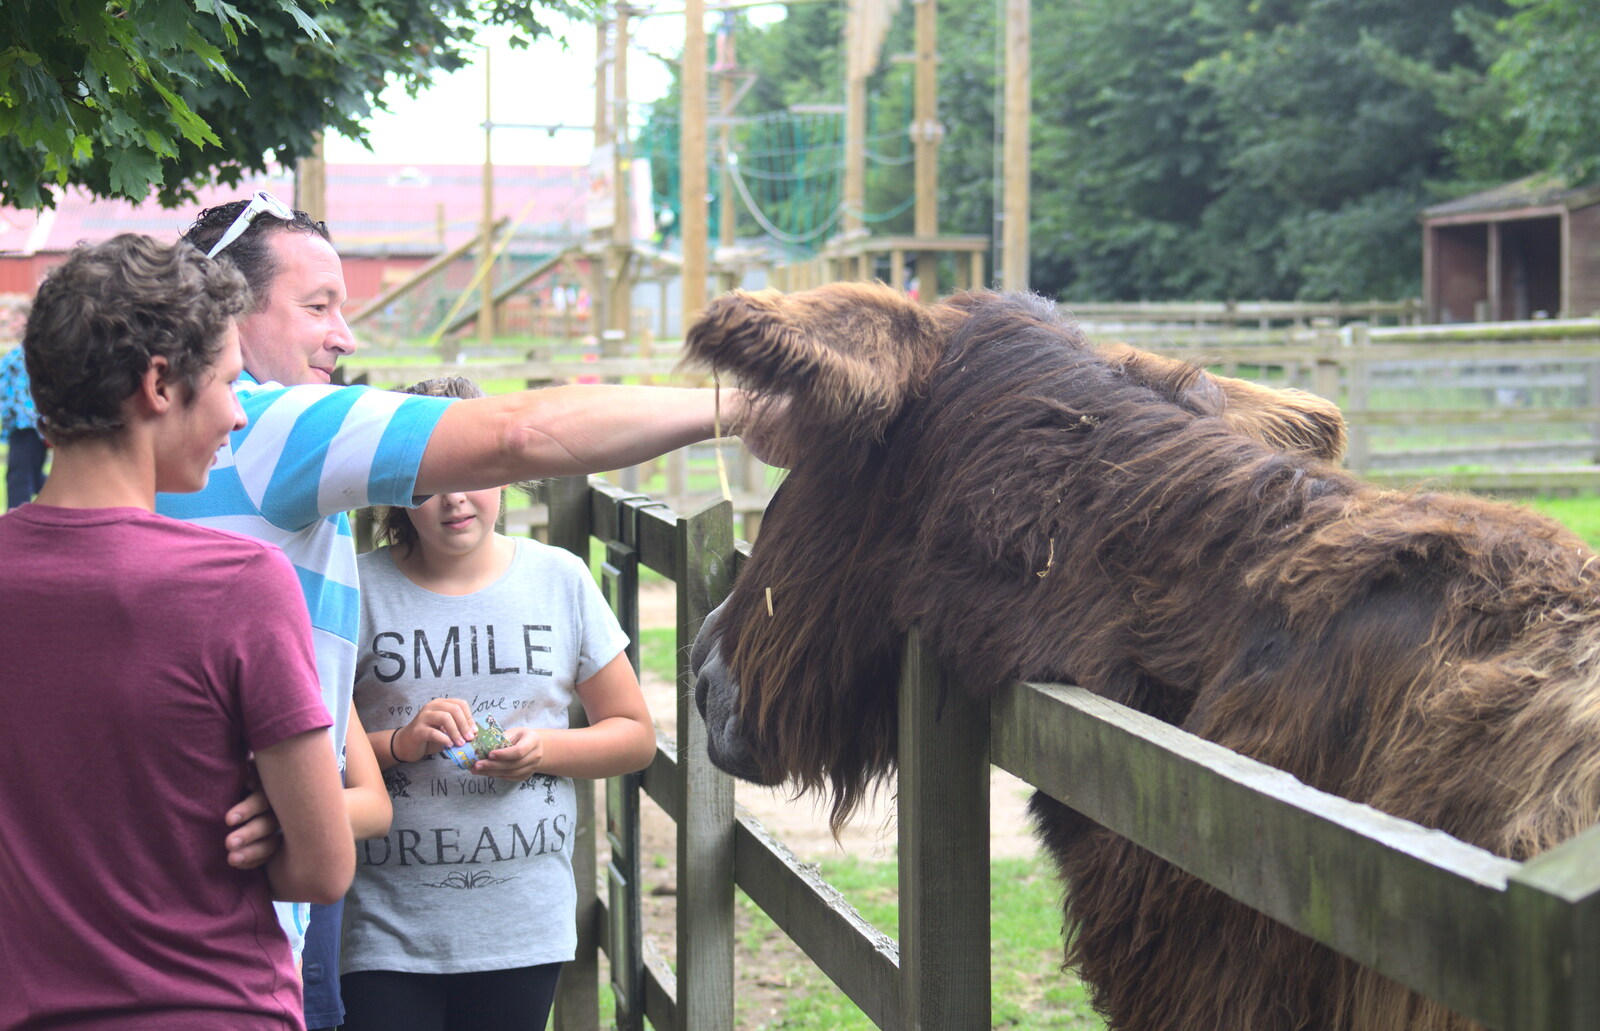 People interact with the massive hairy donkey from Tiger Cubs at Banham Zoo, Banham, Norfolk - 6th August 2013